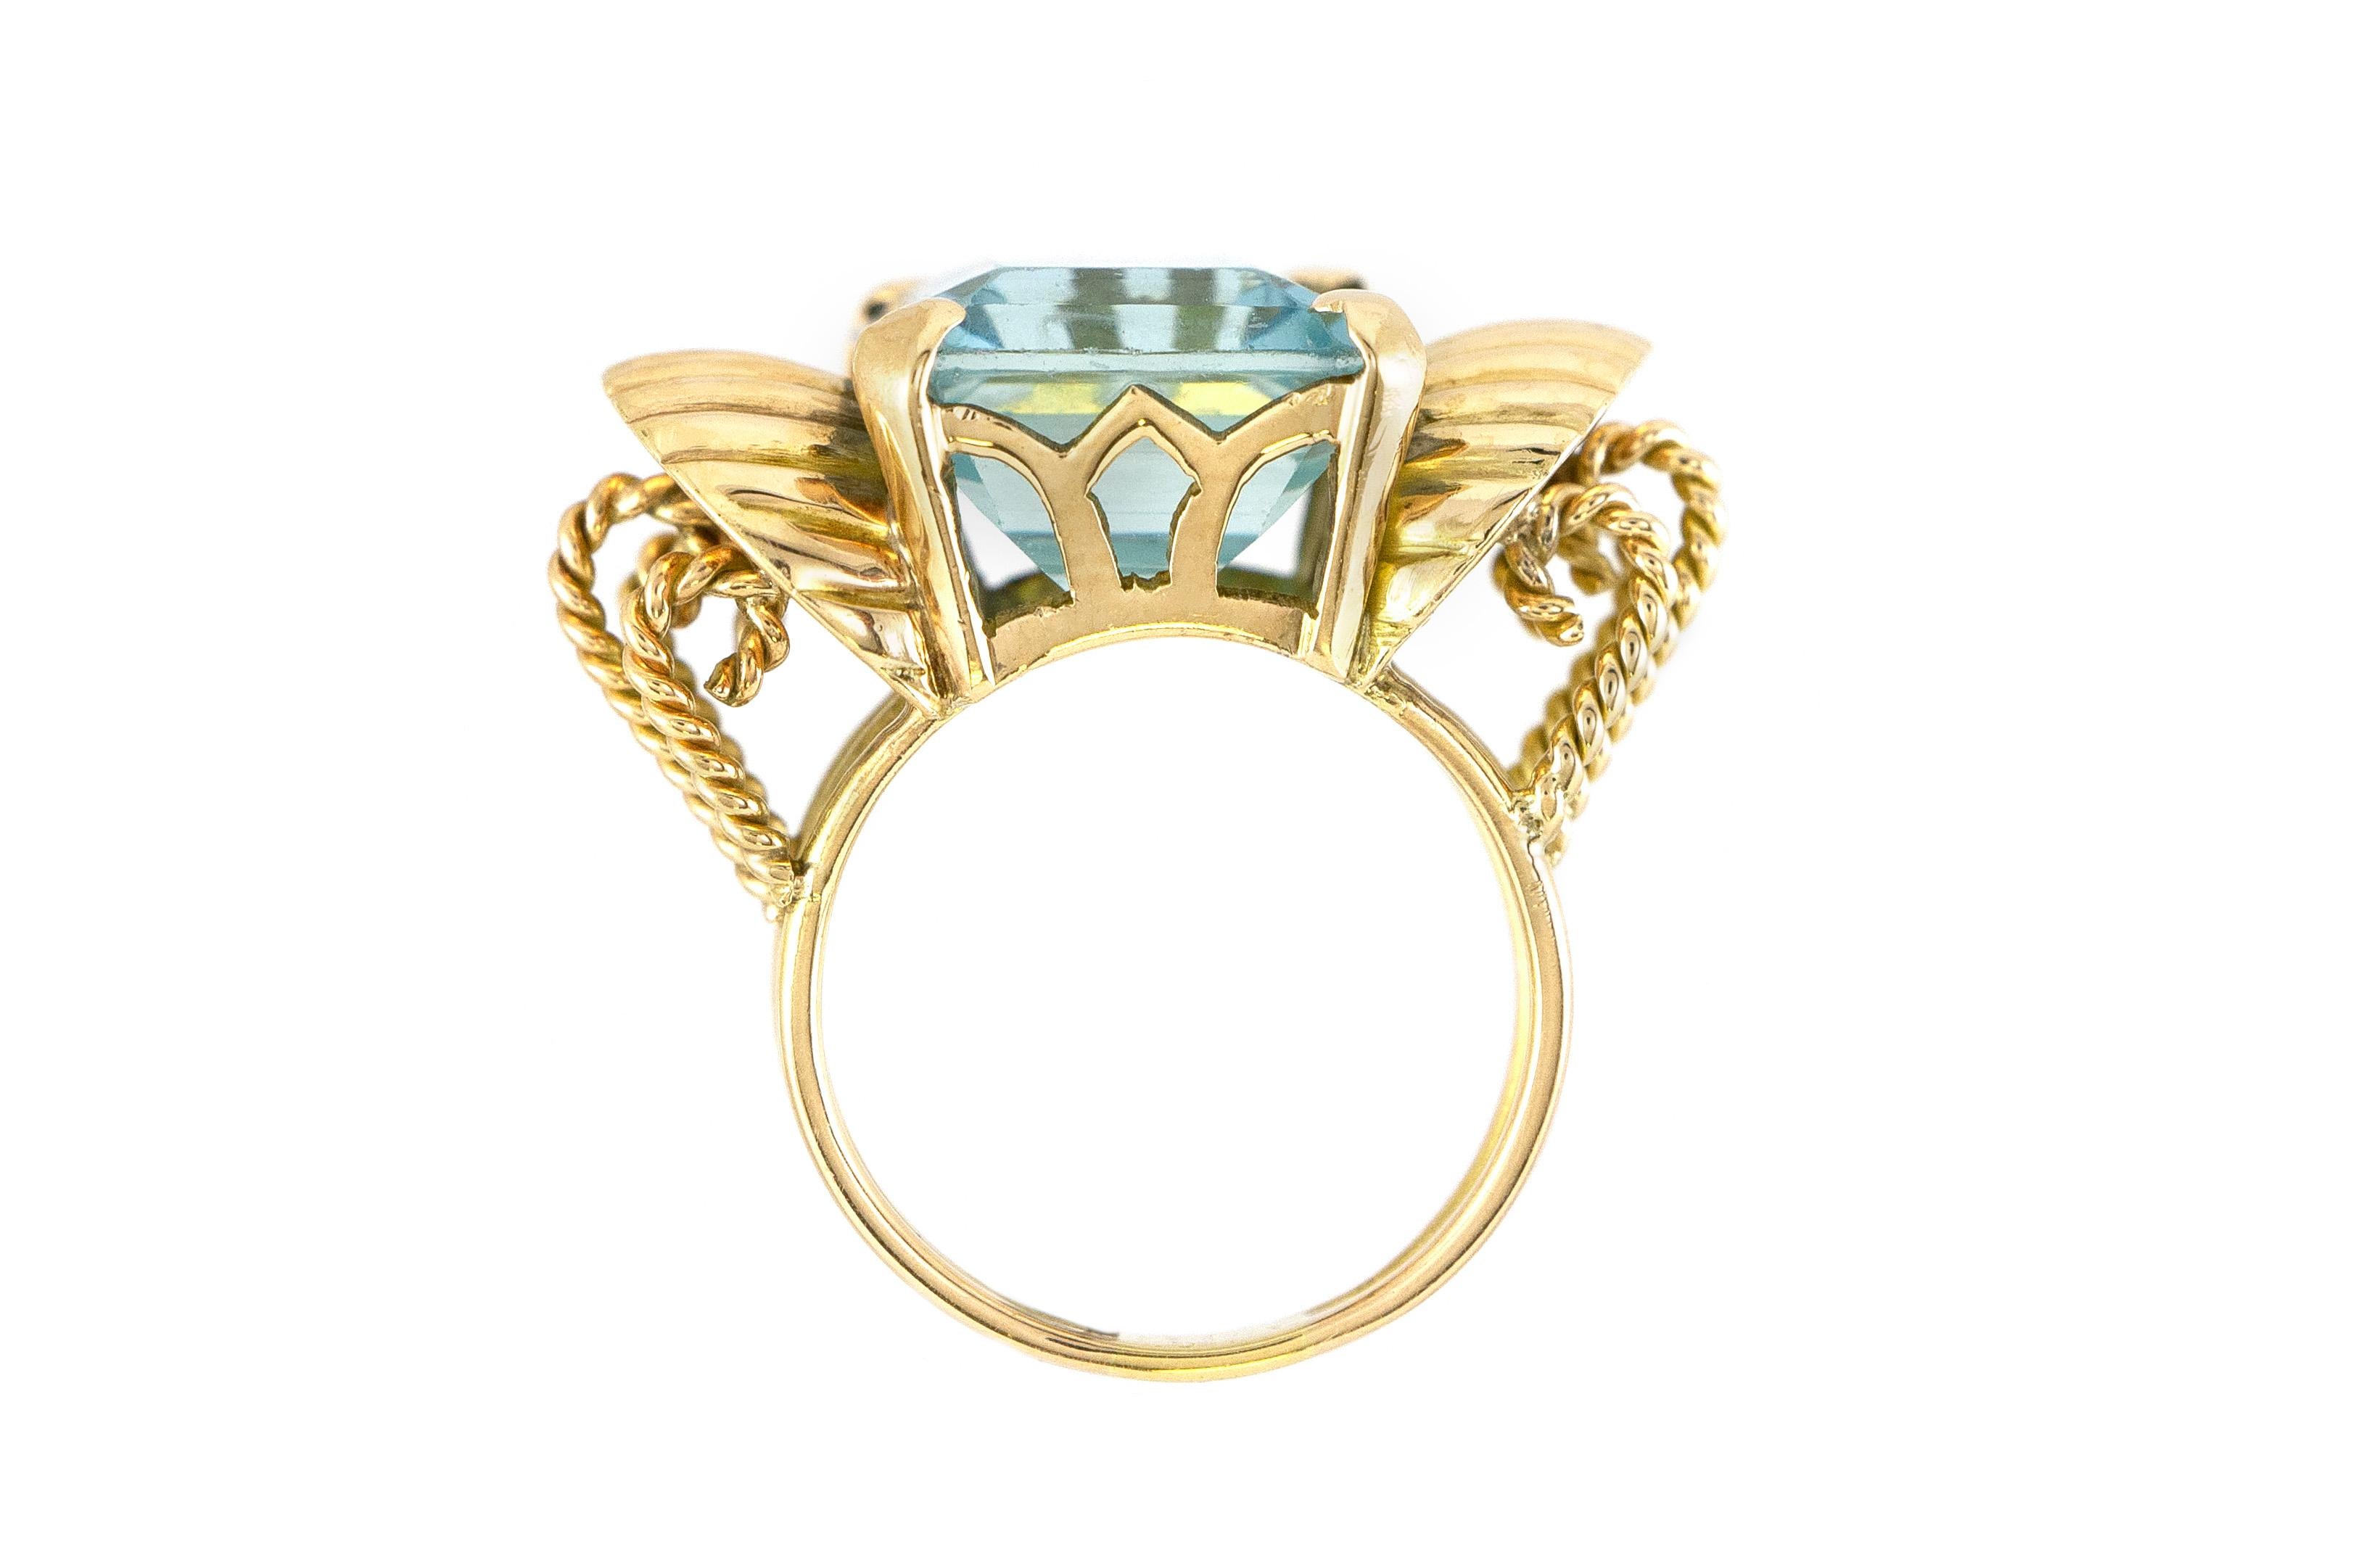 The ring is finely crafted in 18k yellow gold with center stone aquamarine weighing approximately total of 12.00 carat.